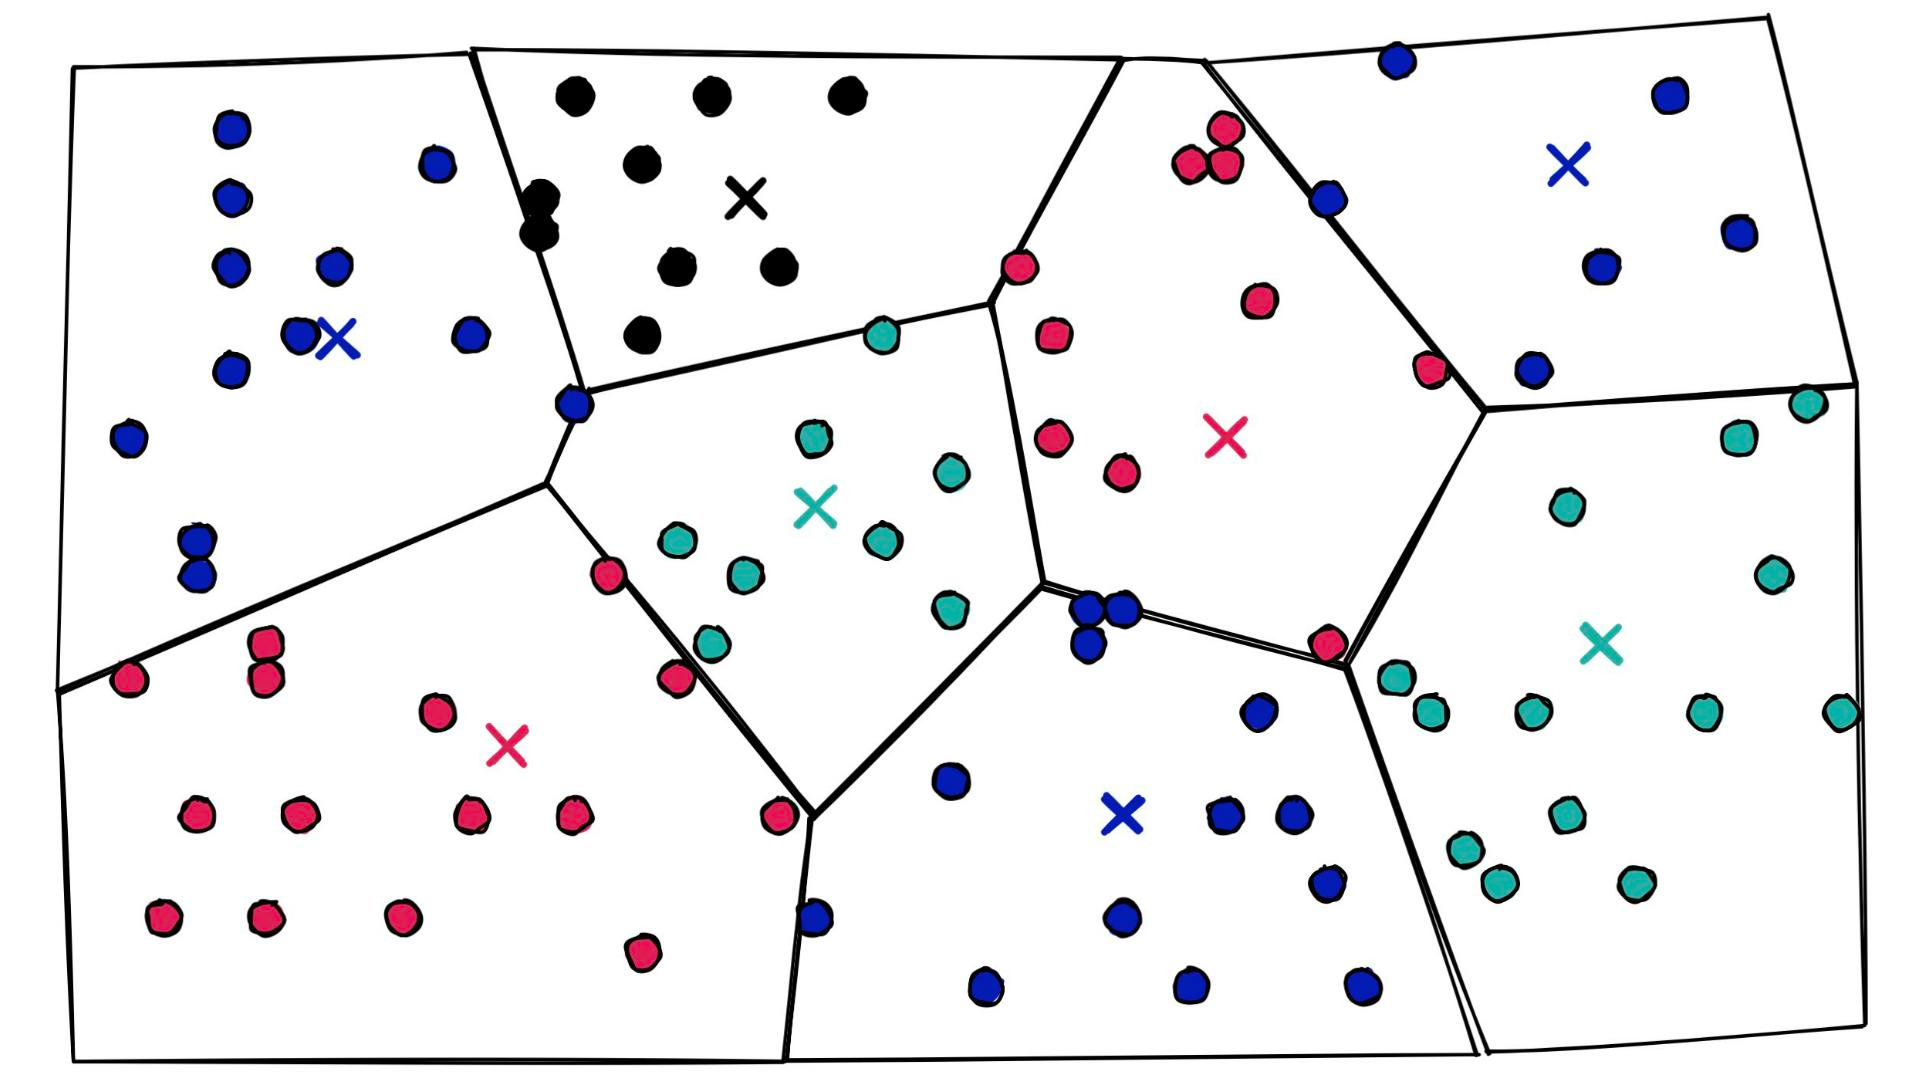 2D chart showing our quantized ‘PQ’ vectors that have now been assigned to different Voronoi cells via IVF.